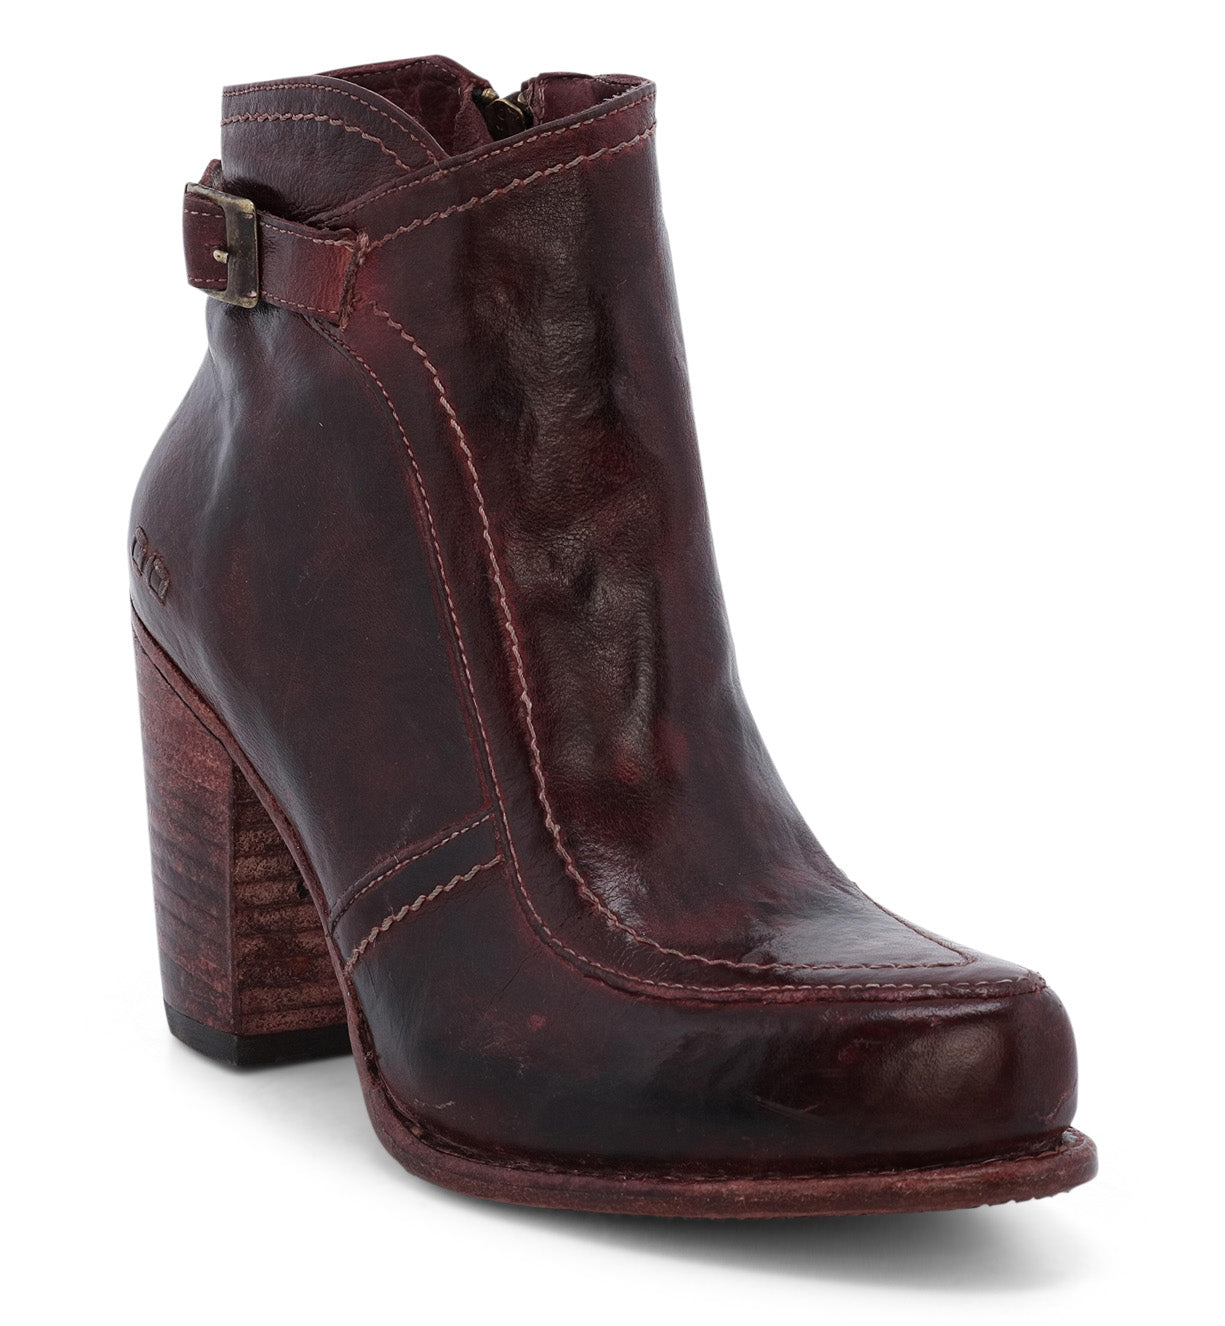 A burgundy leather ankle boot named Isla by Bed Stu with a wooden heel.